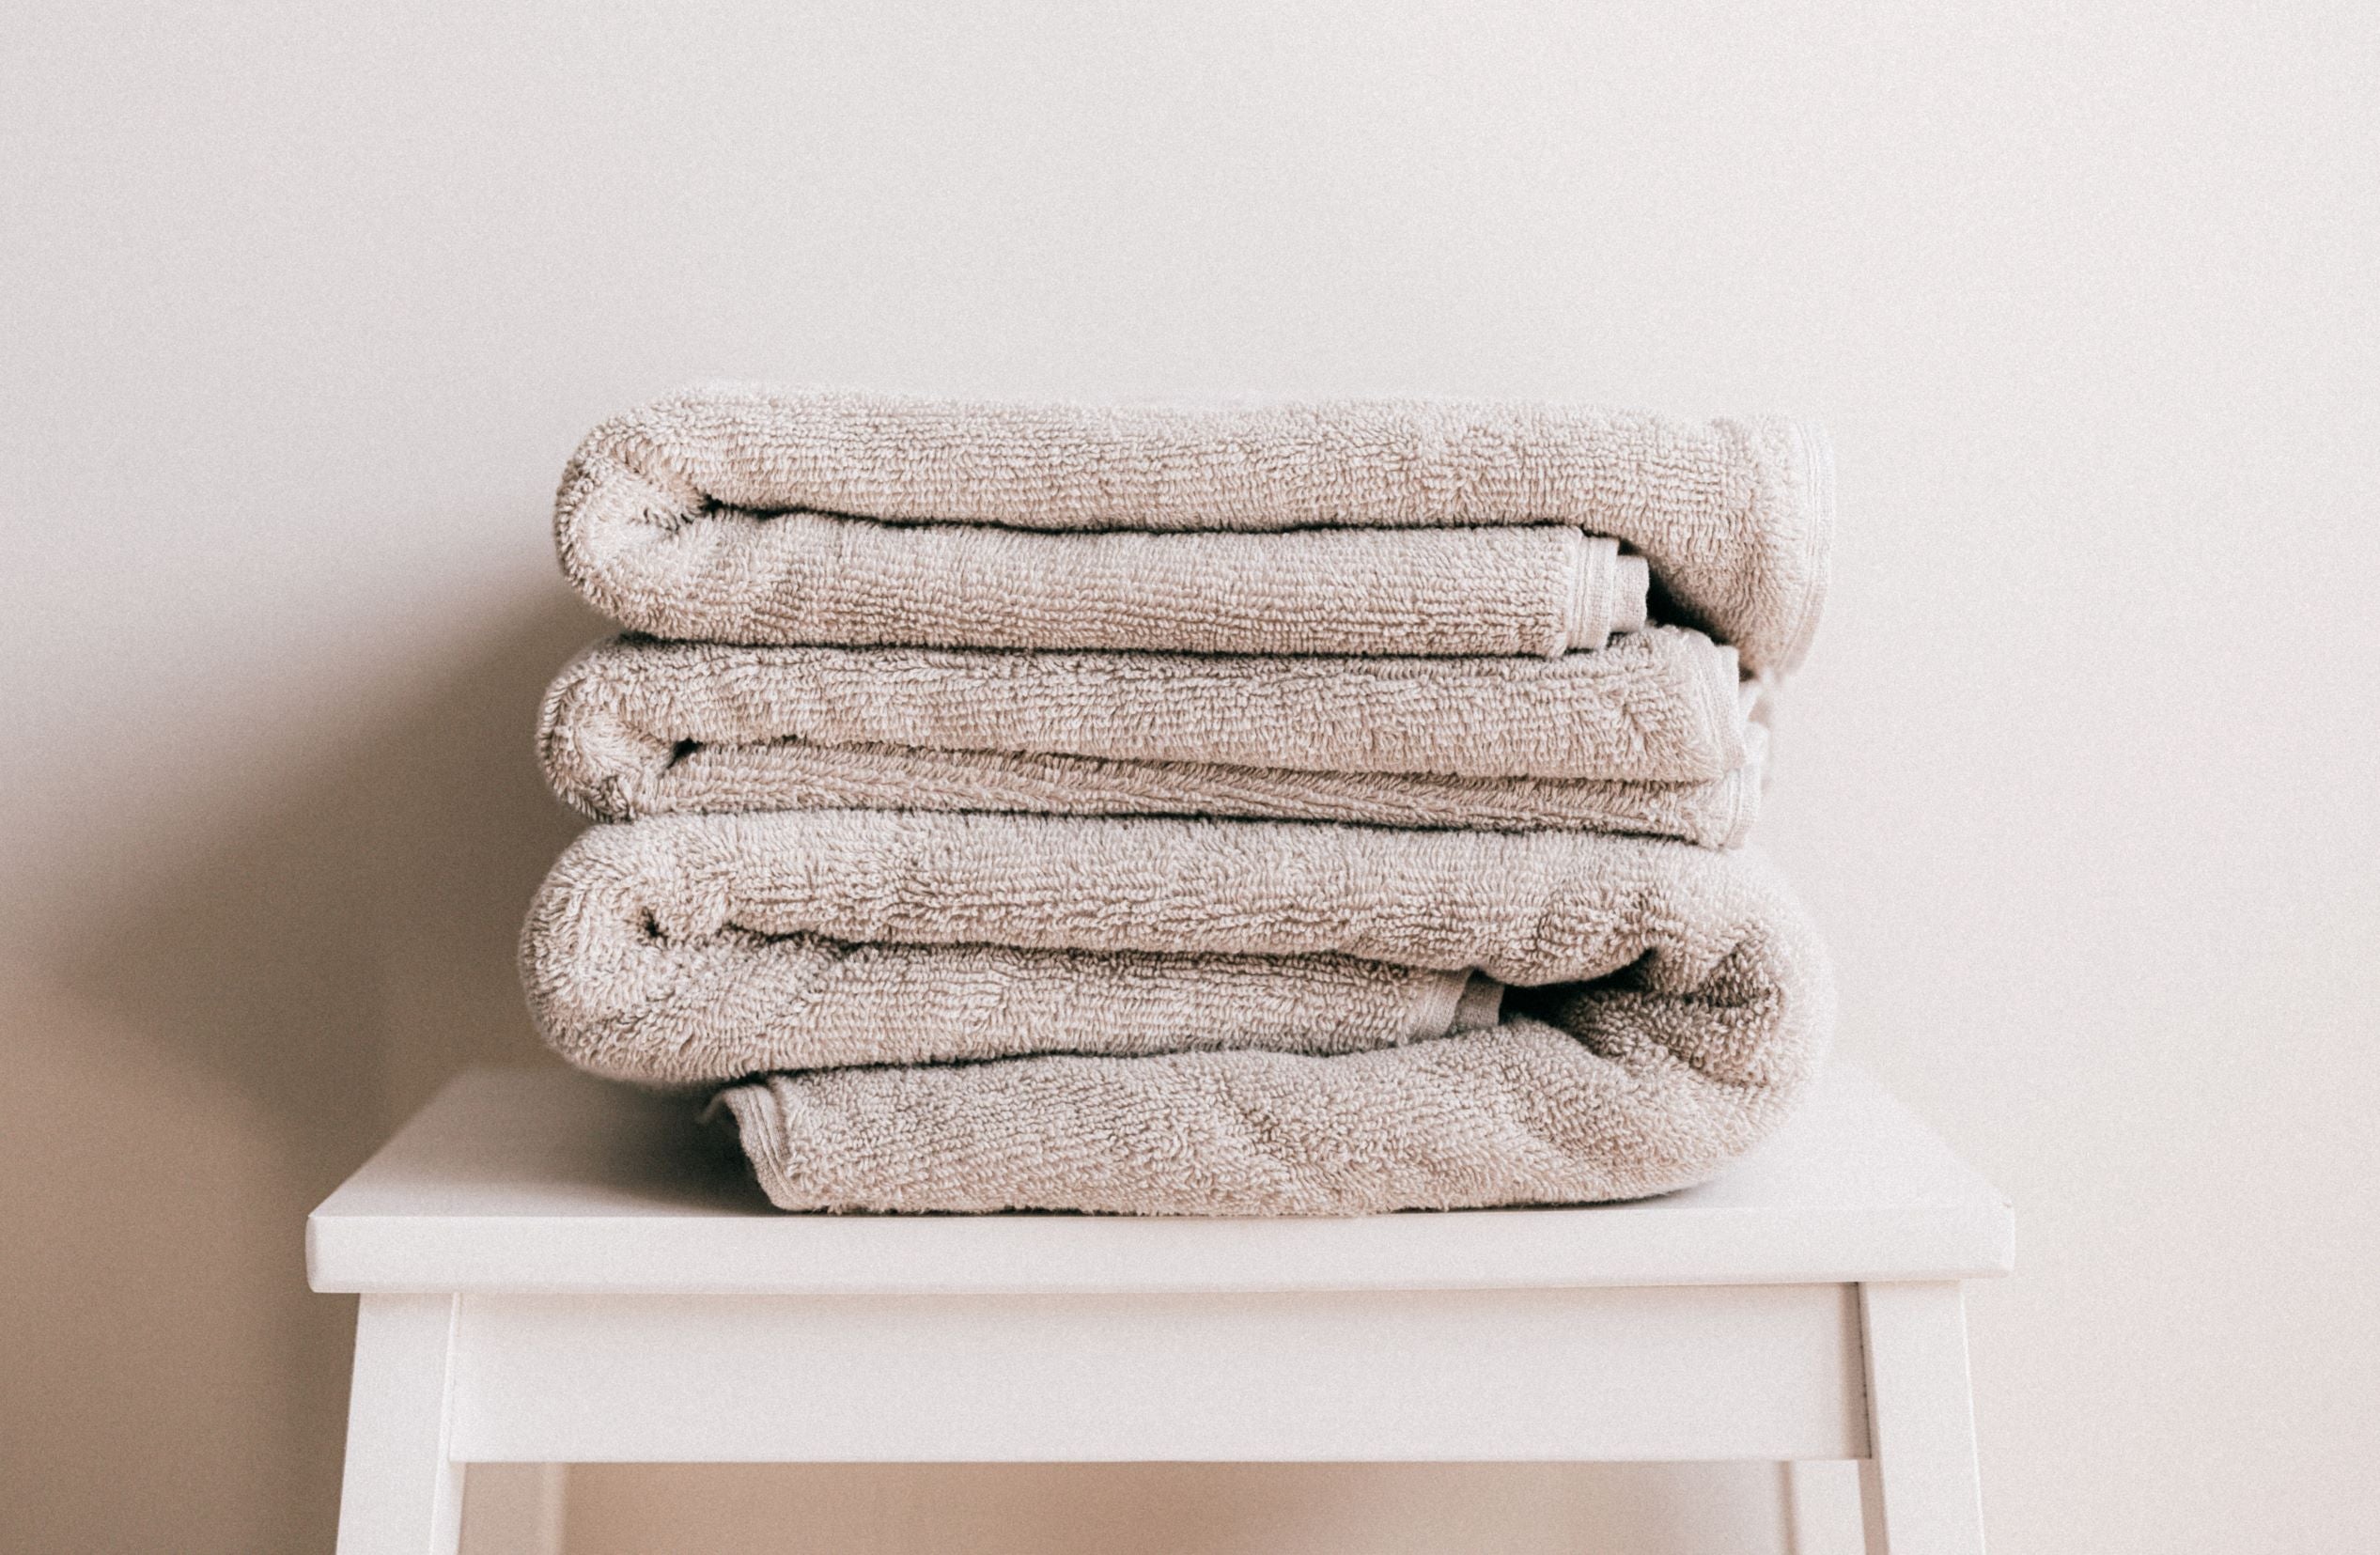 Towels Stack - The Difference Between a Bath Towel and Bath Sheet